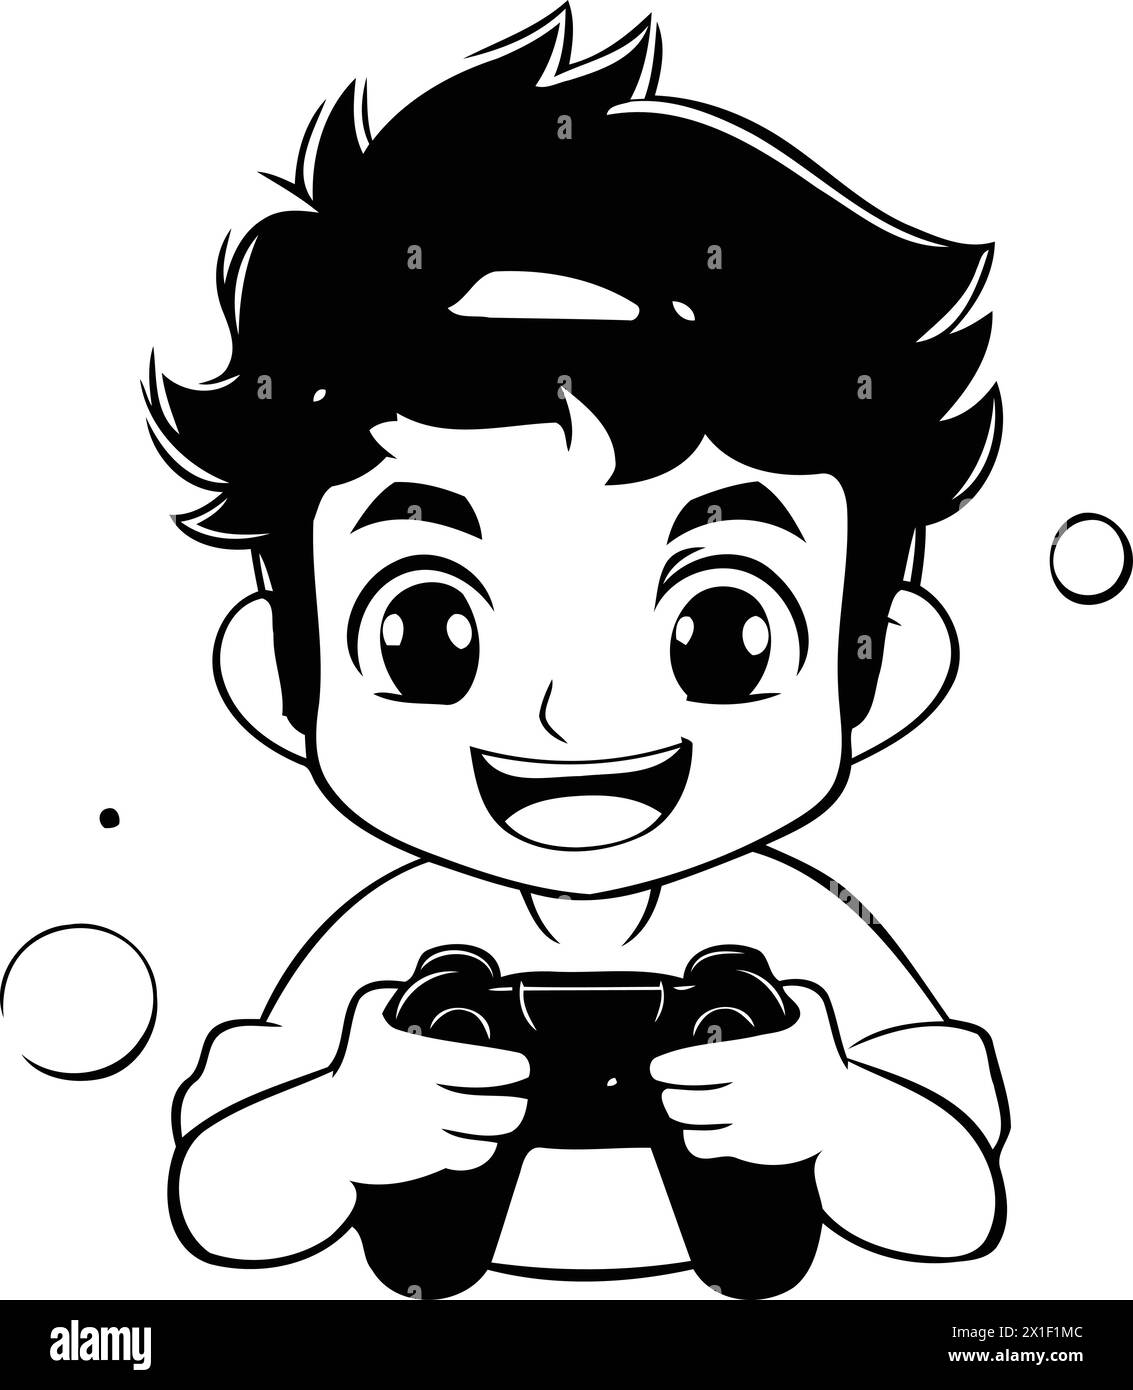 Boy playing video game with joystick. Vector illustration in cartoon style. Stock Vector